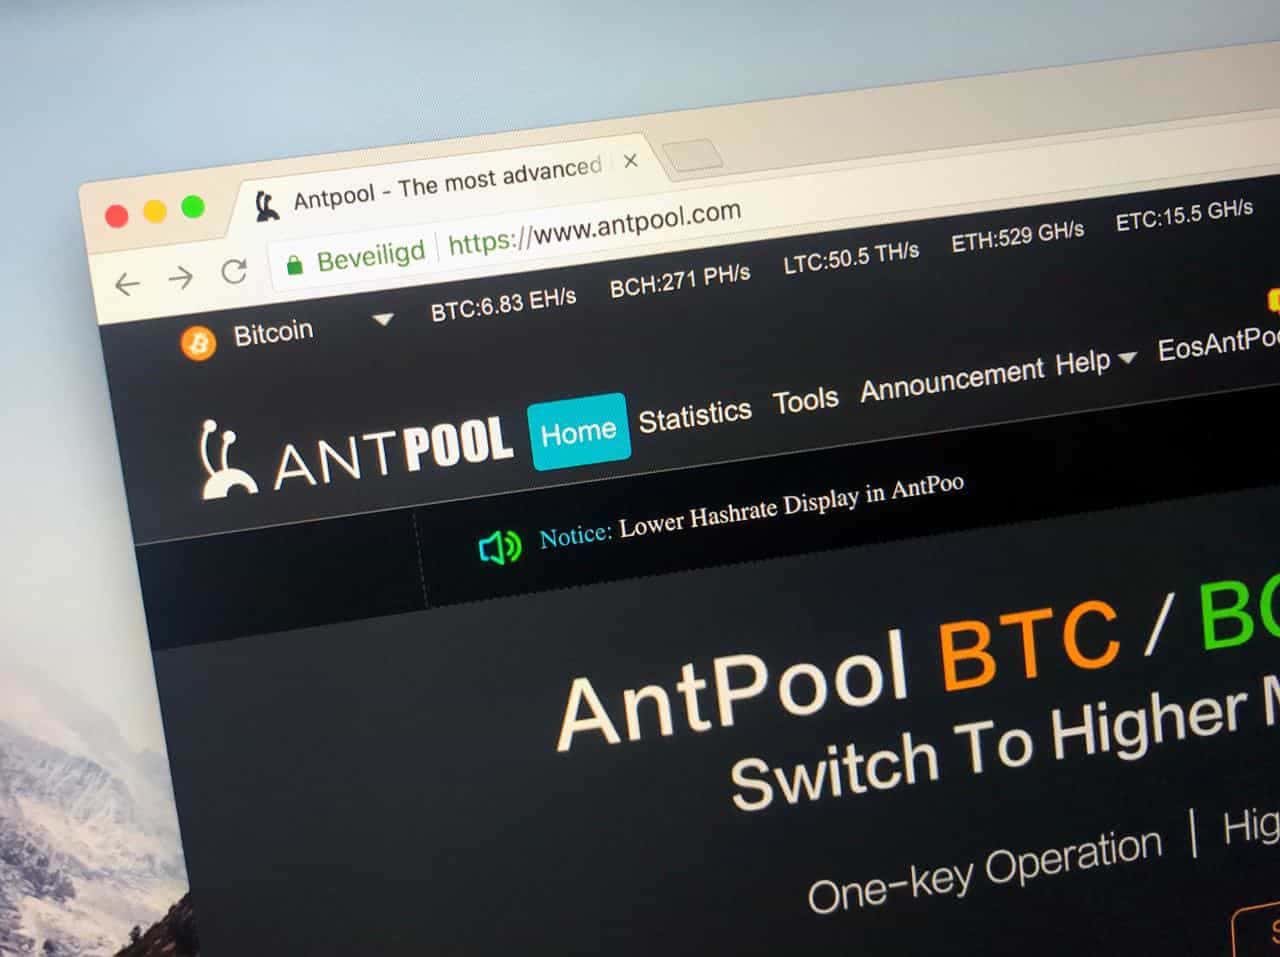 Bitcoin Mining Firm AntPool Offers Refund for $3 Million Record Transfer Fee - Unchained